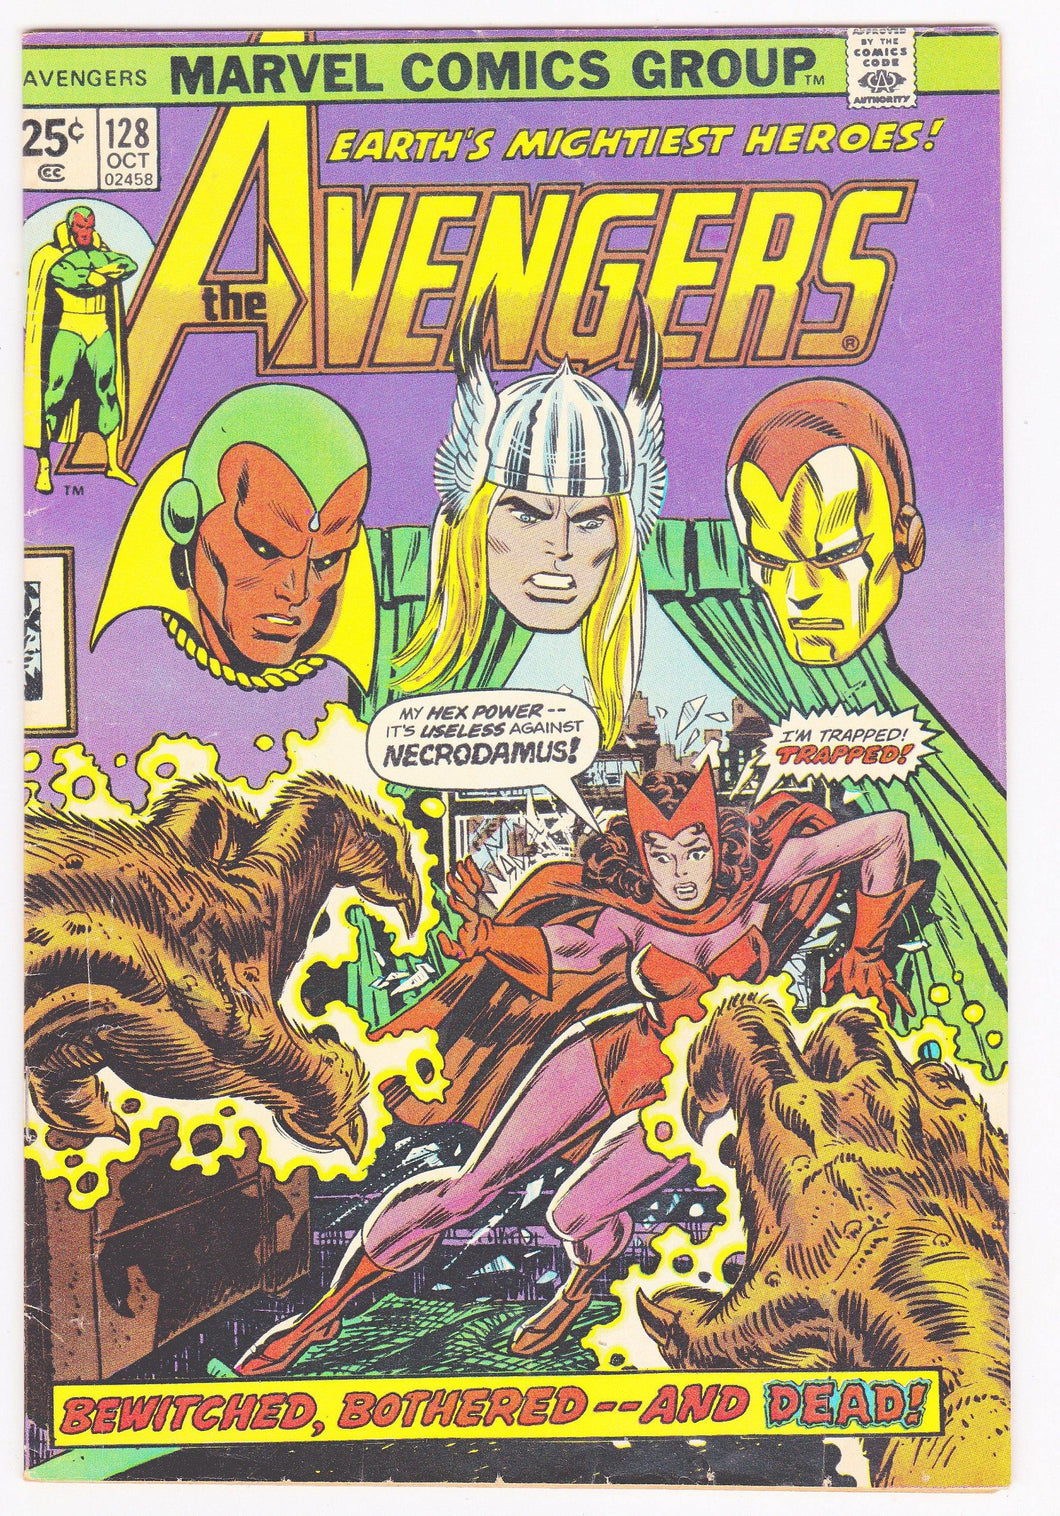 The Avengers no. 128 October 1974 Marvel Comics Stan Lee Bewitched Bothered and Dead - TulipStuff